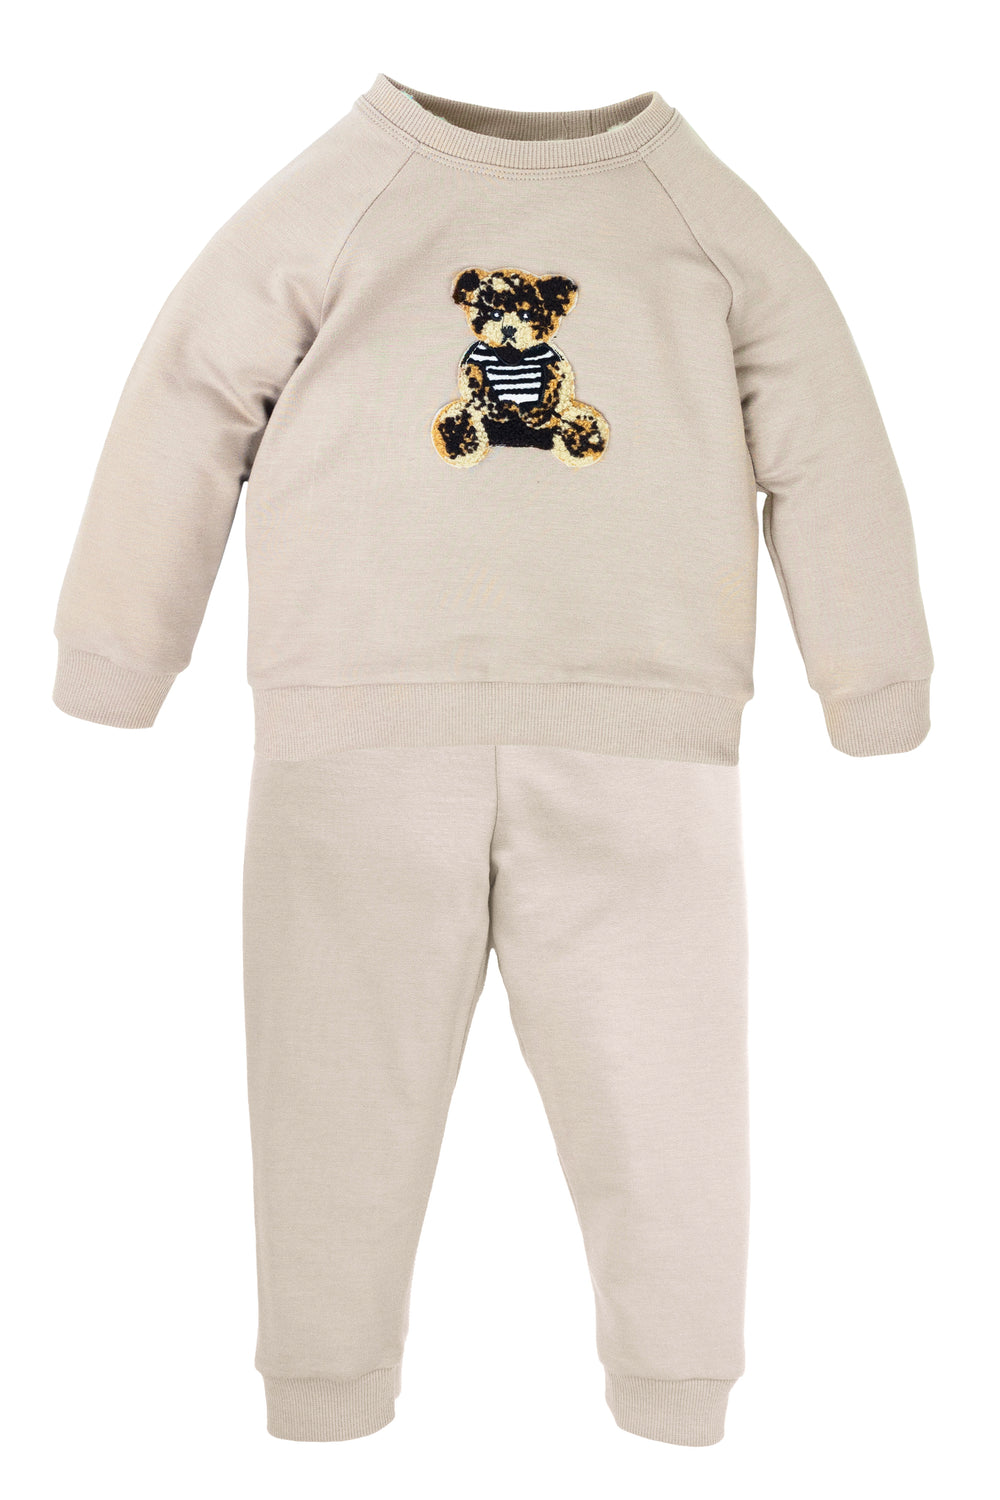 Jamiks "Timothy" Beige Bamboo Teddy Tracksuit | Millie and John